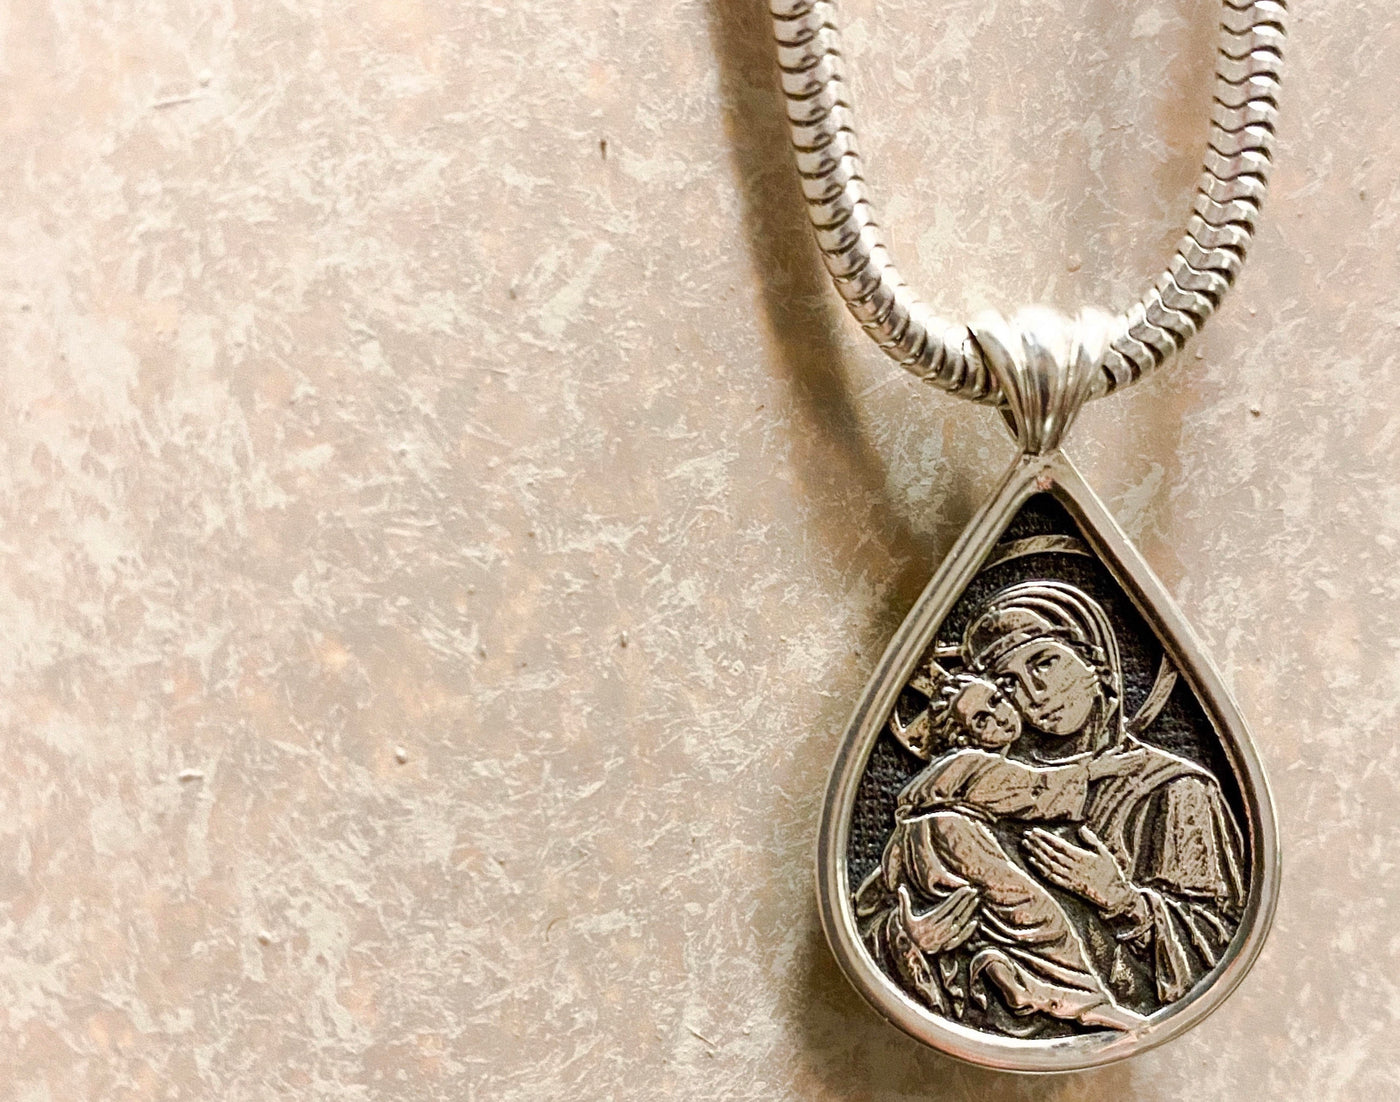 Saints of Christ Orthodox Christian Icon Jewelry - Sterling Silver Teardrop Icon pendant with recess oxidation of the Virgin Mary and Theotokos with Jesus Christ in her arms. Available in other shapes, sizes, and materials. 